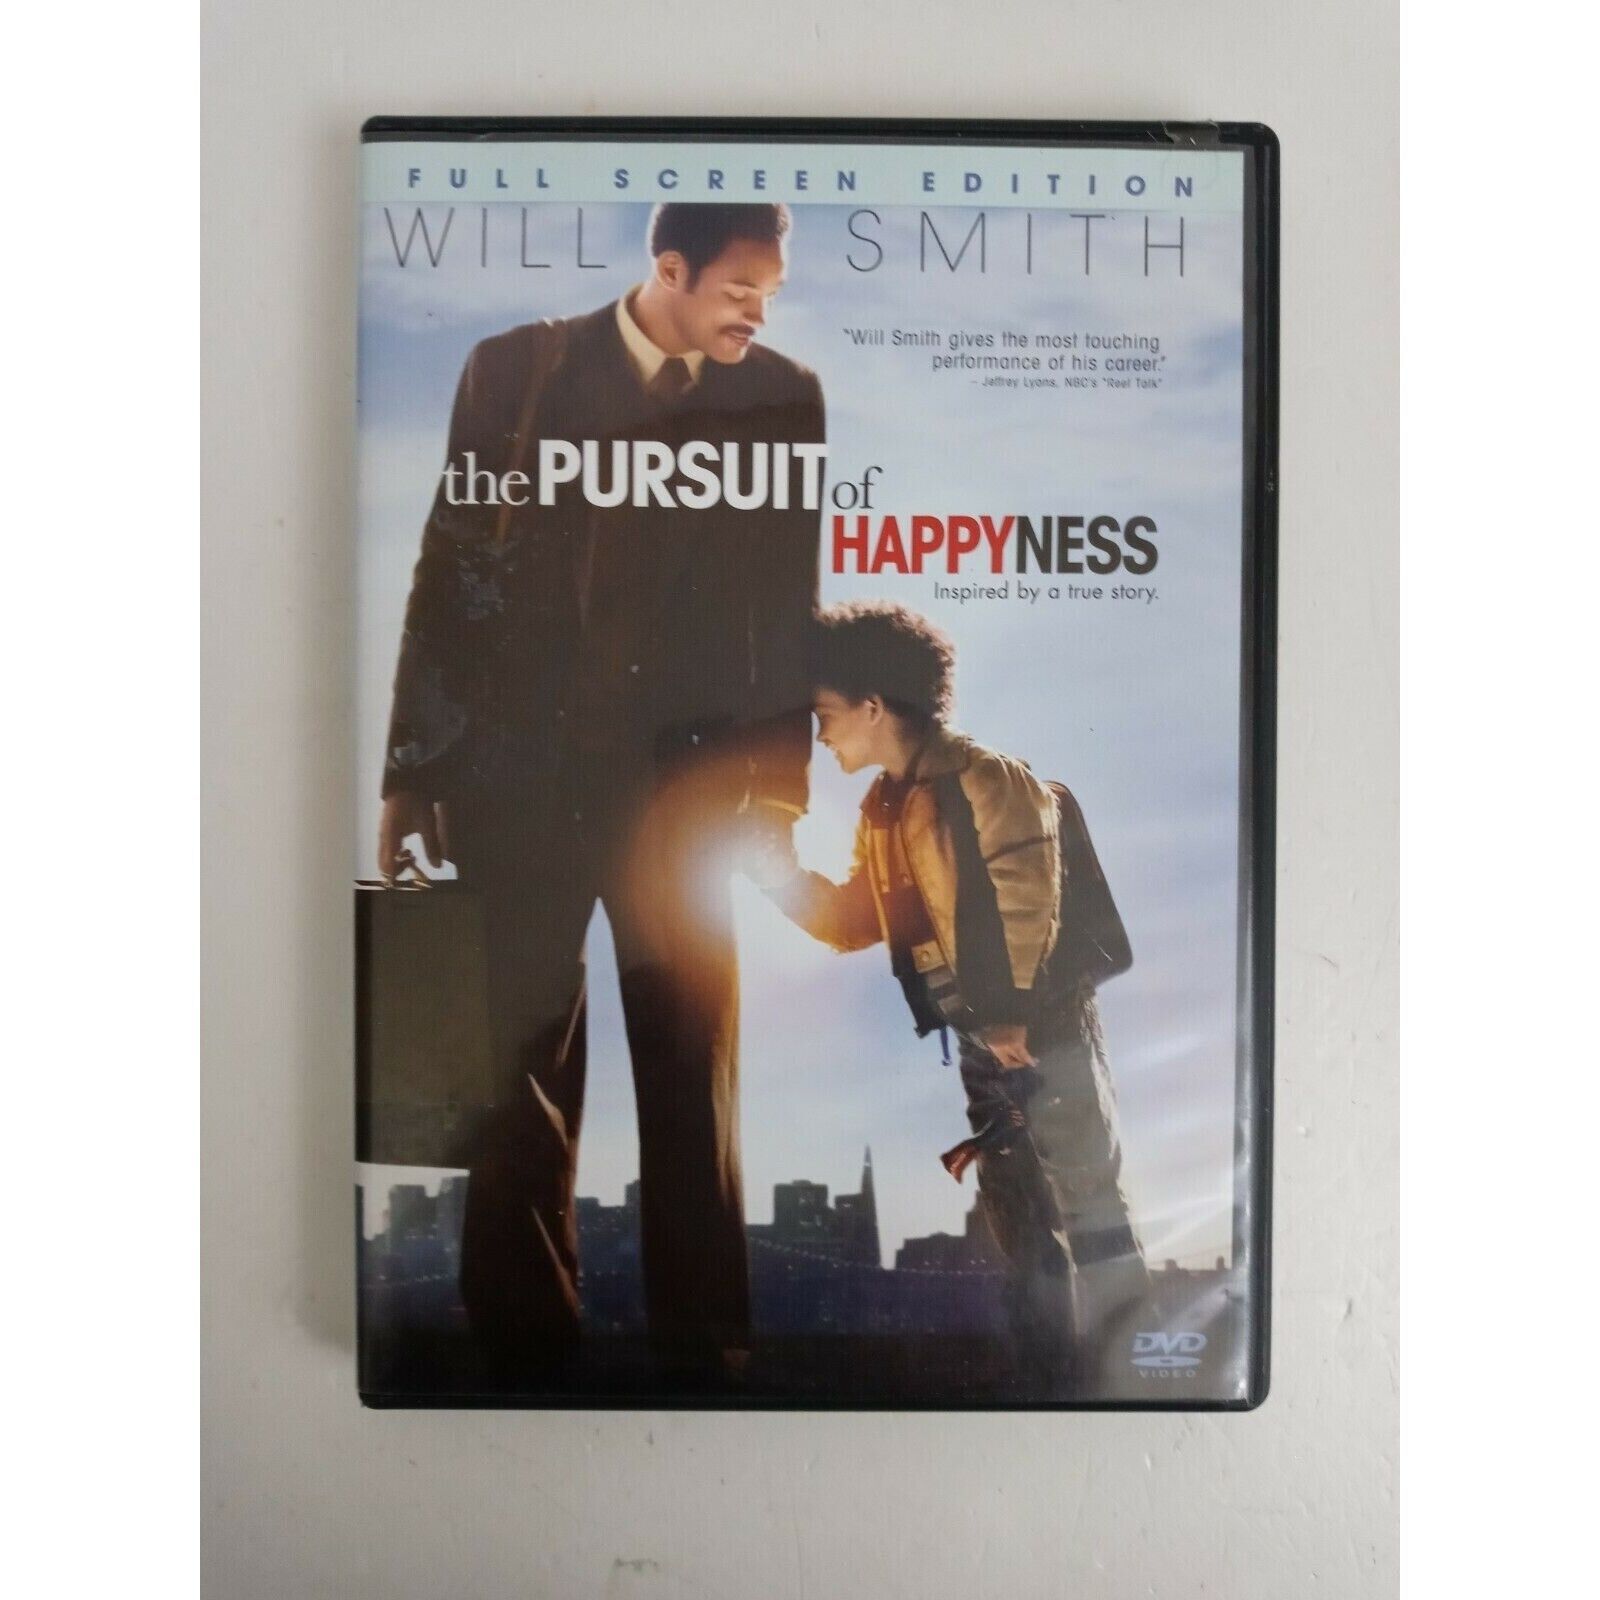 Primary image for The Pursuit of Happyness (Full Screen Edition) DVD